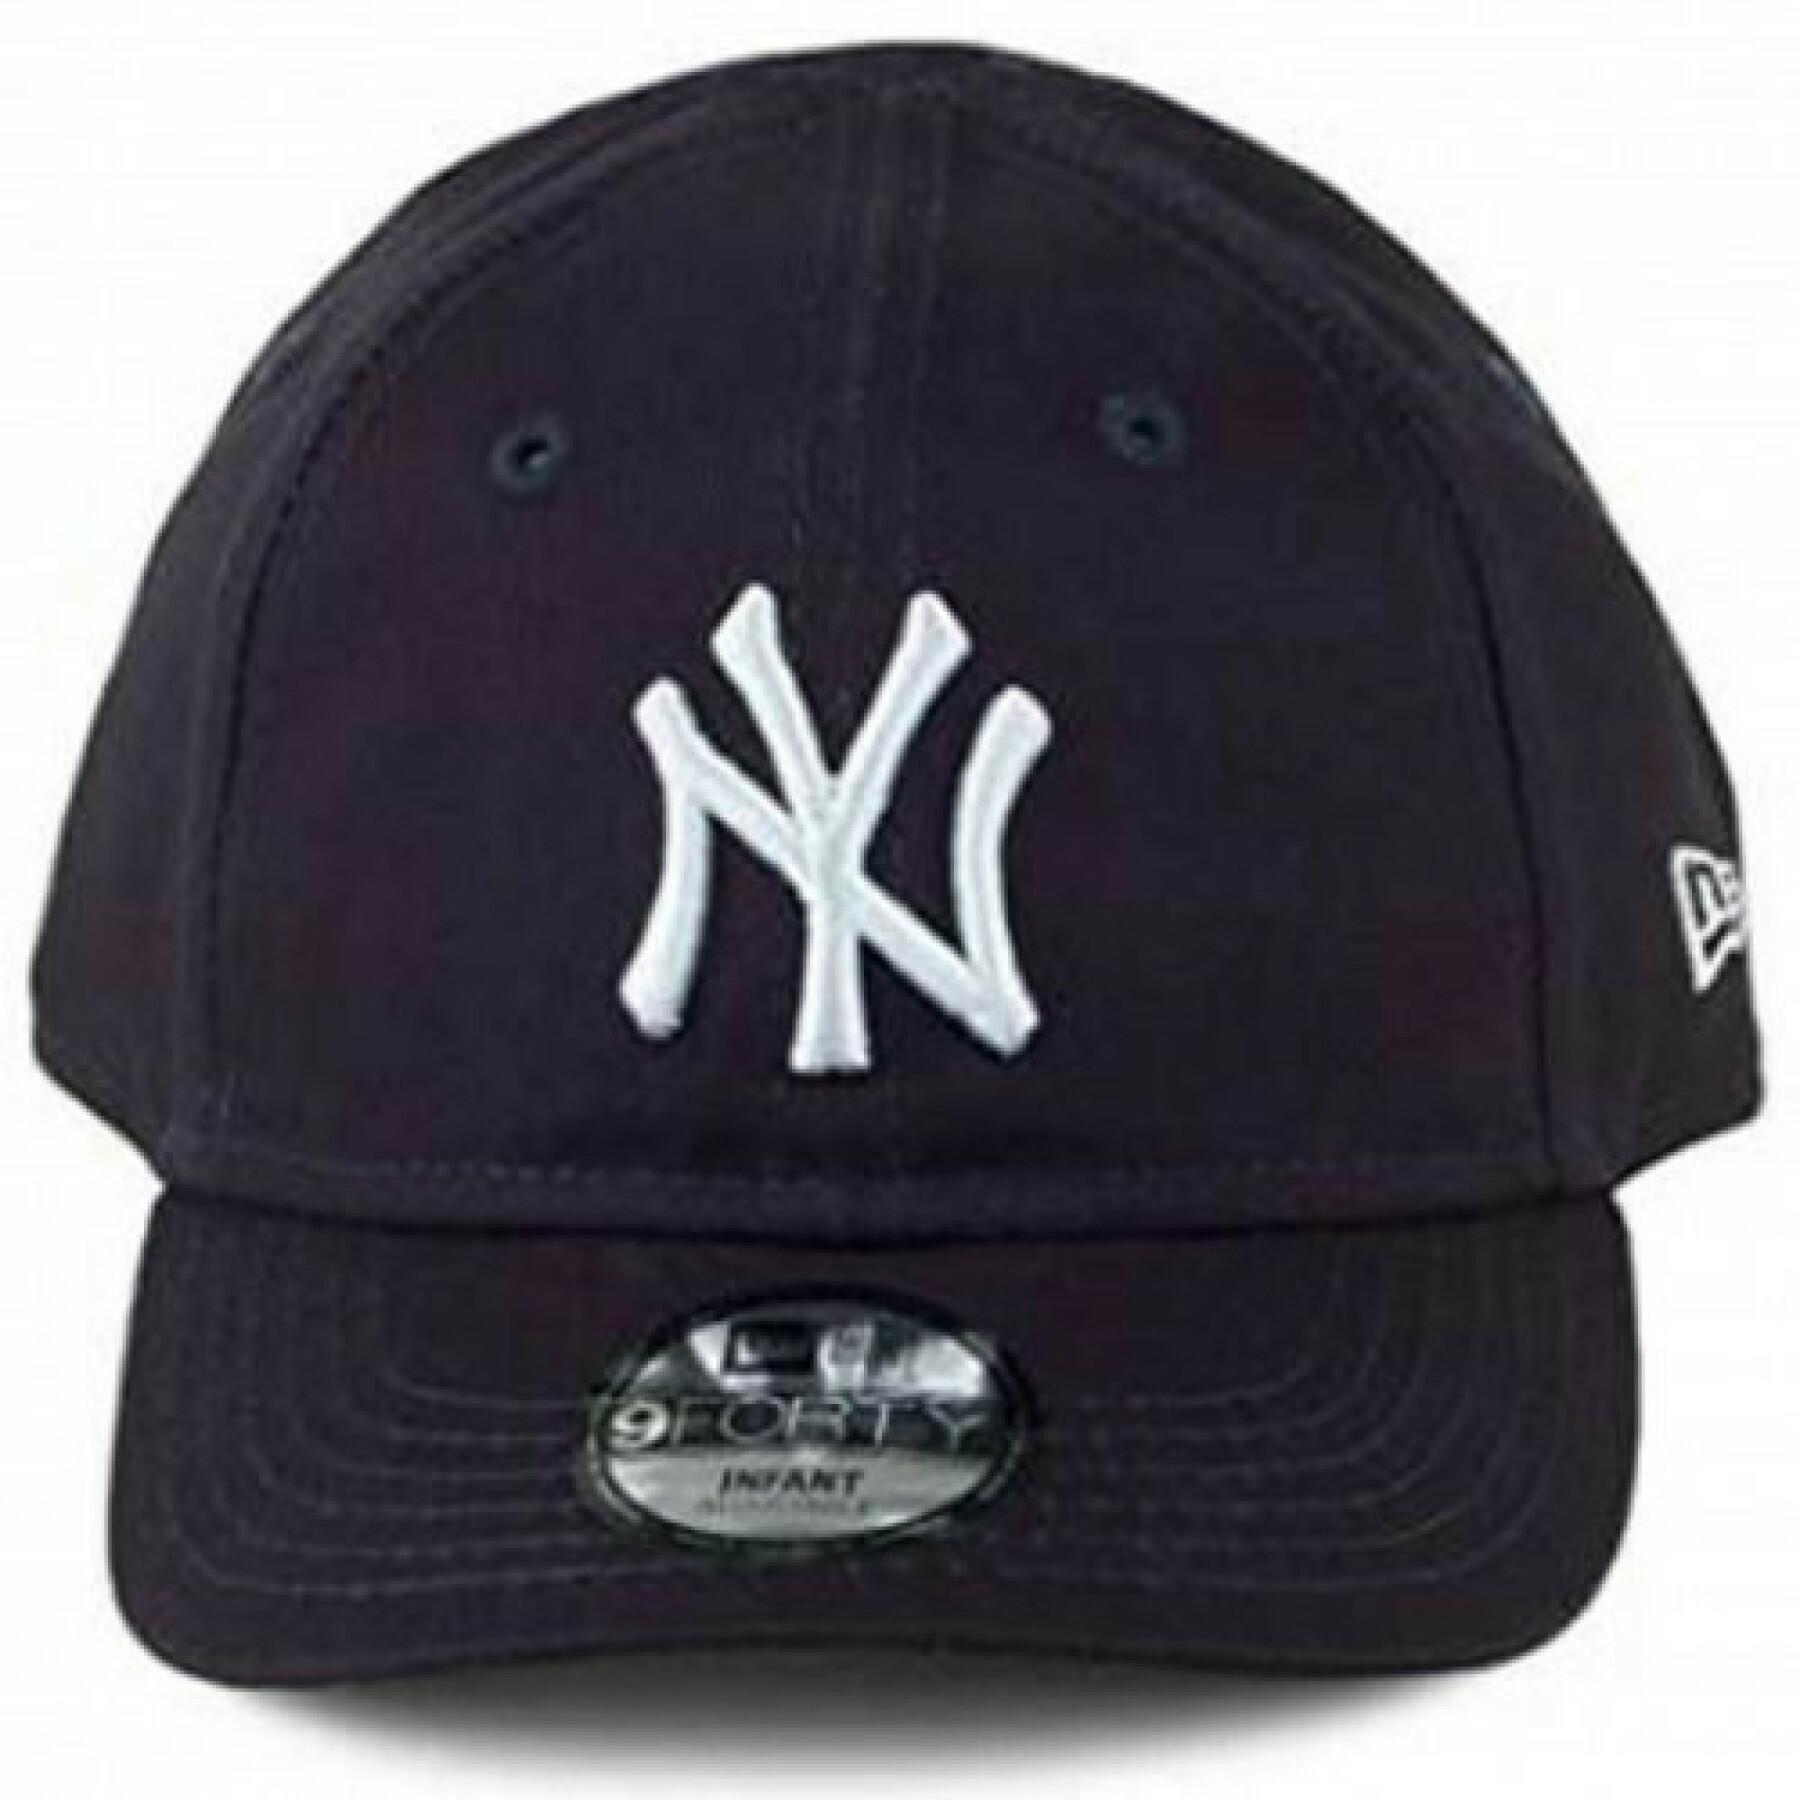 Casquette New Era My First 9forty enfant New York Yankees